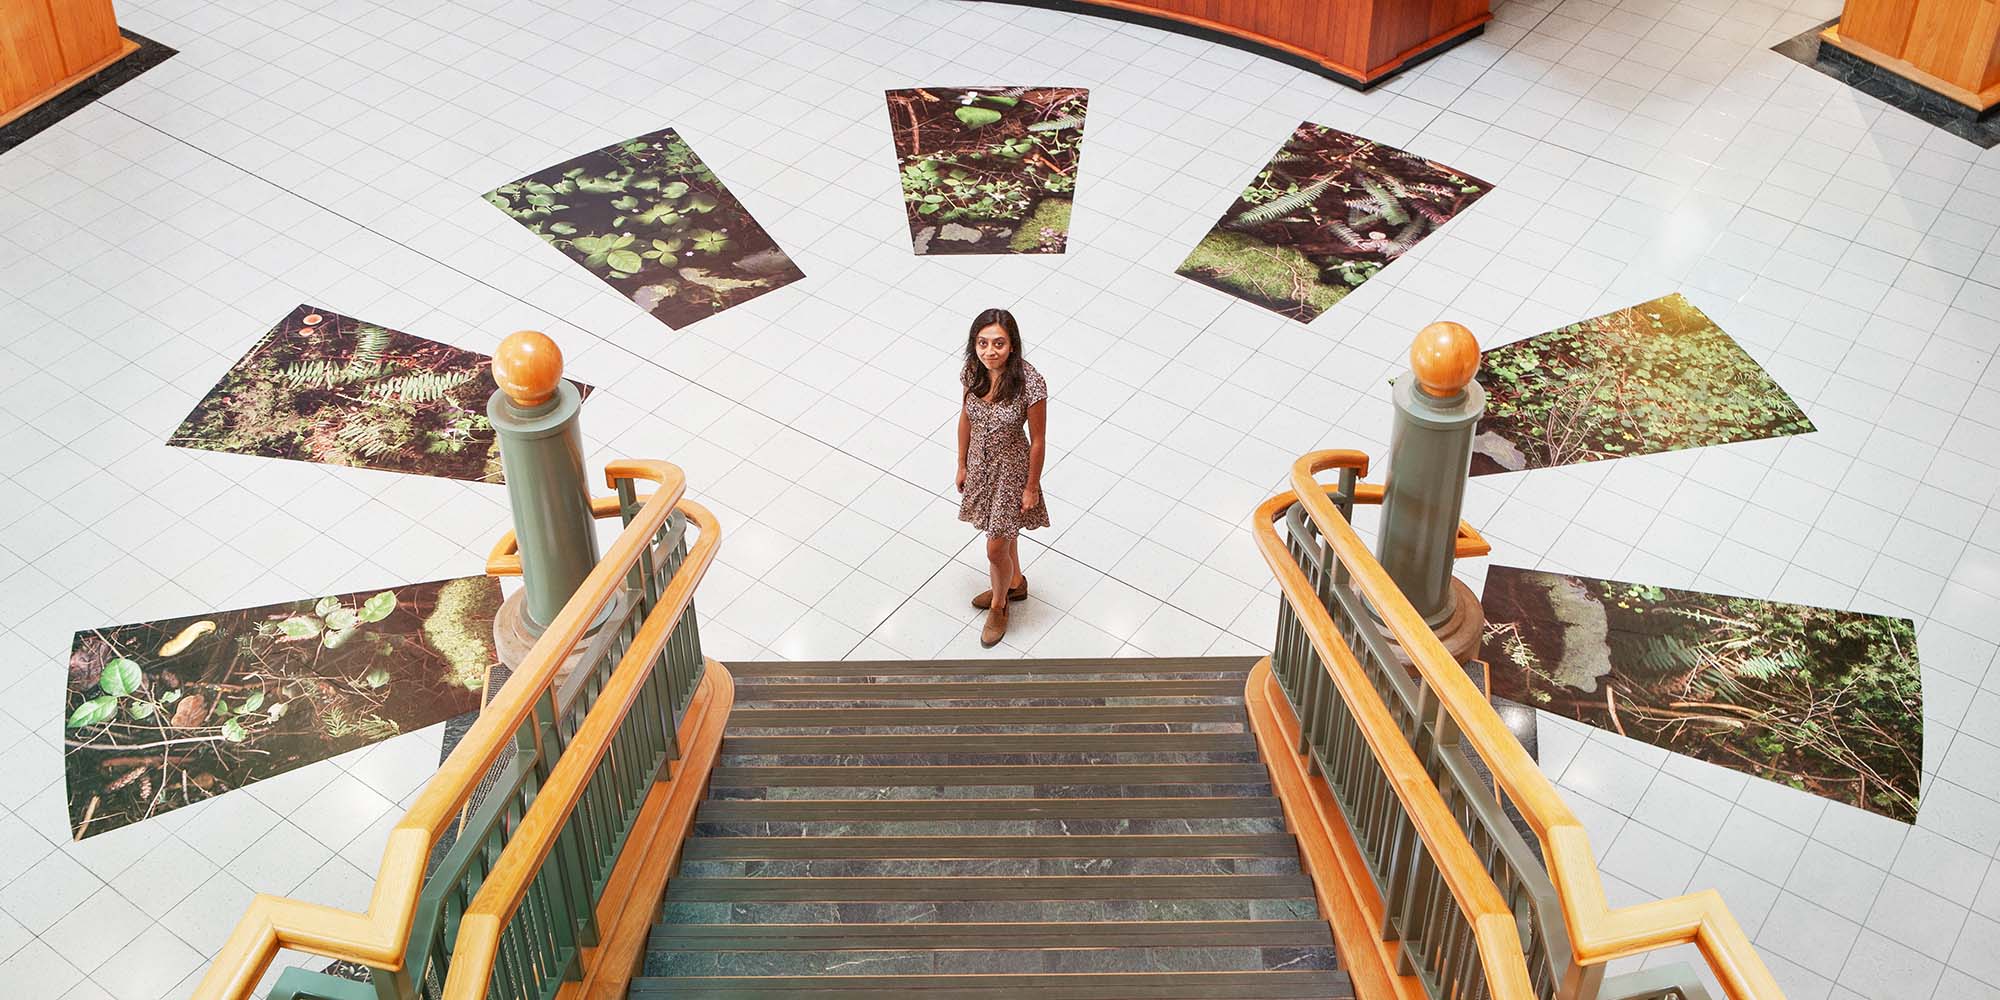 A person standing at the bottom of a staircase, with images of a forest radiating around her on the floor